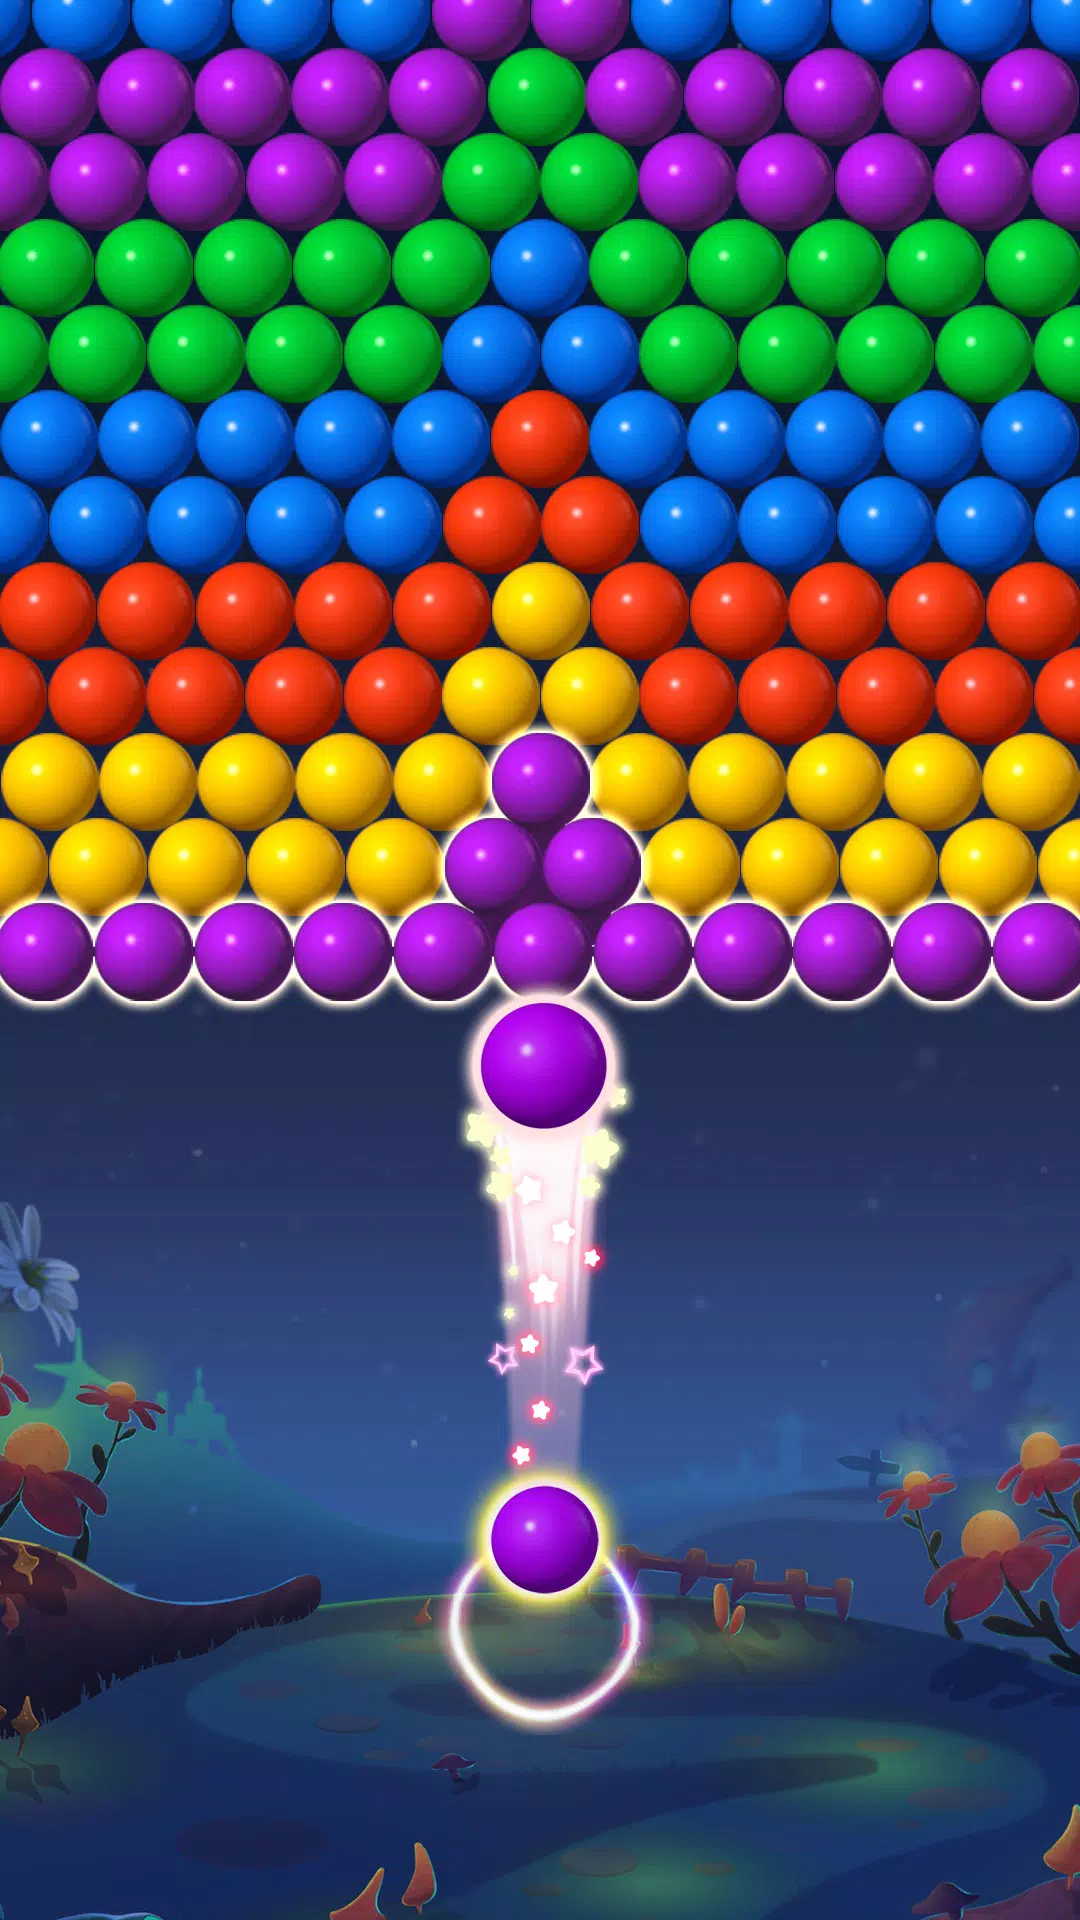 Birdpapa - Bubble Crush APK for Android Download